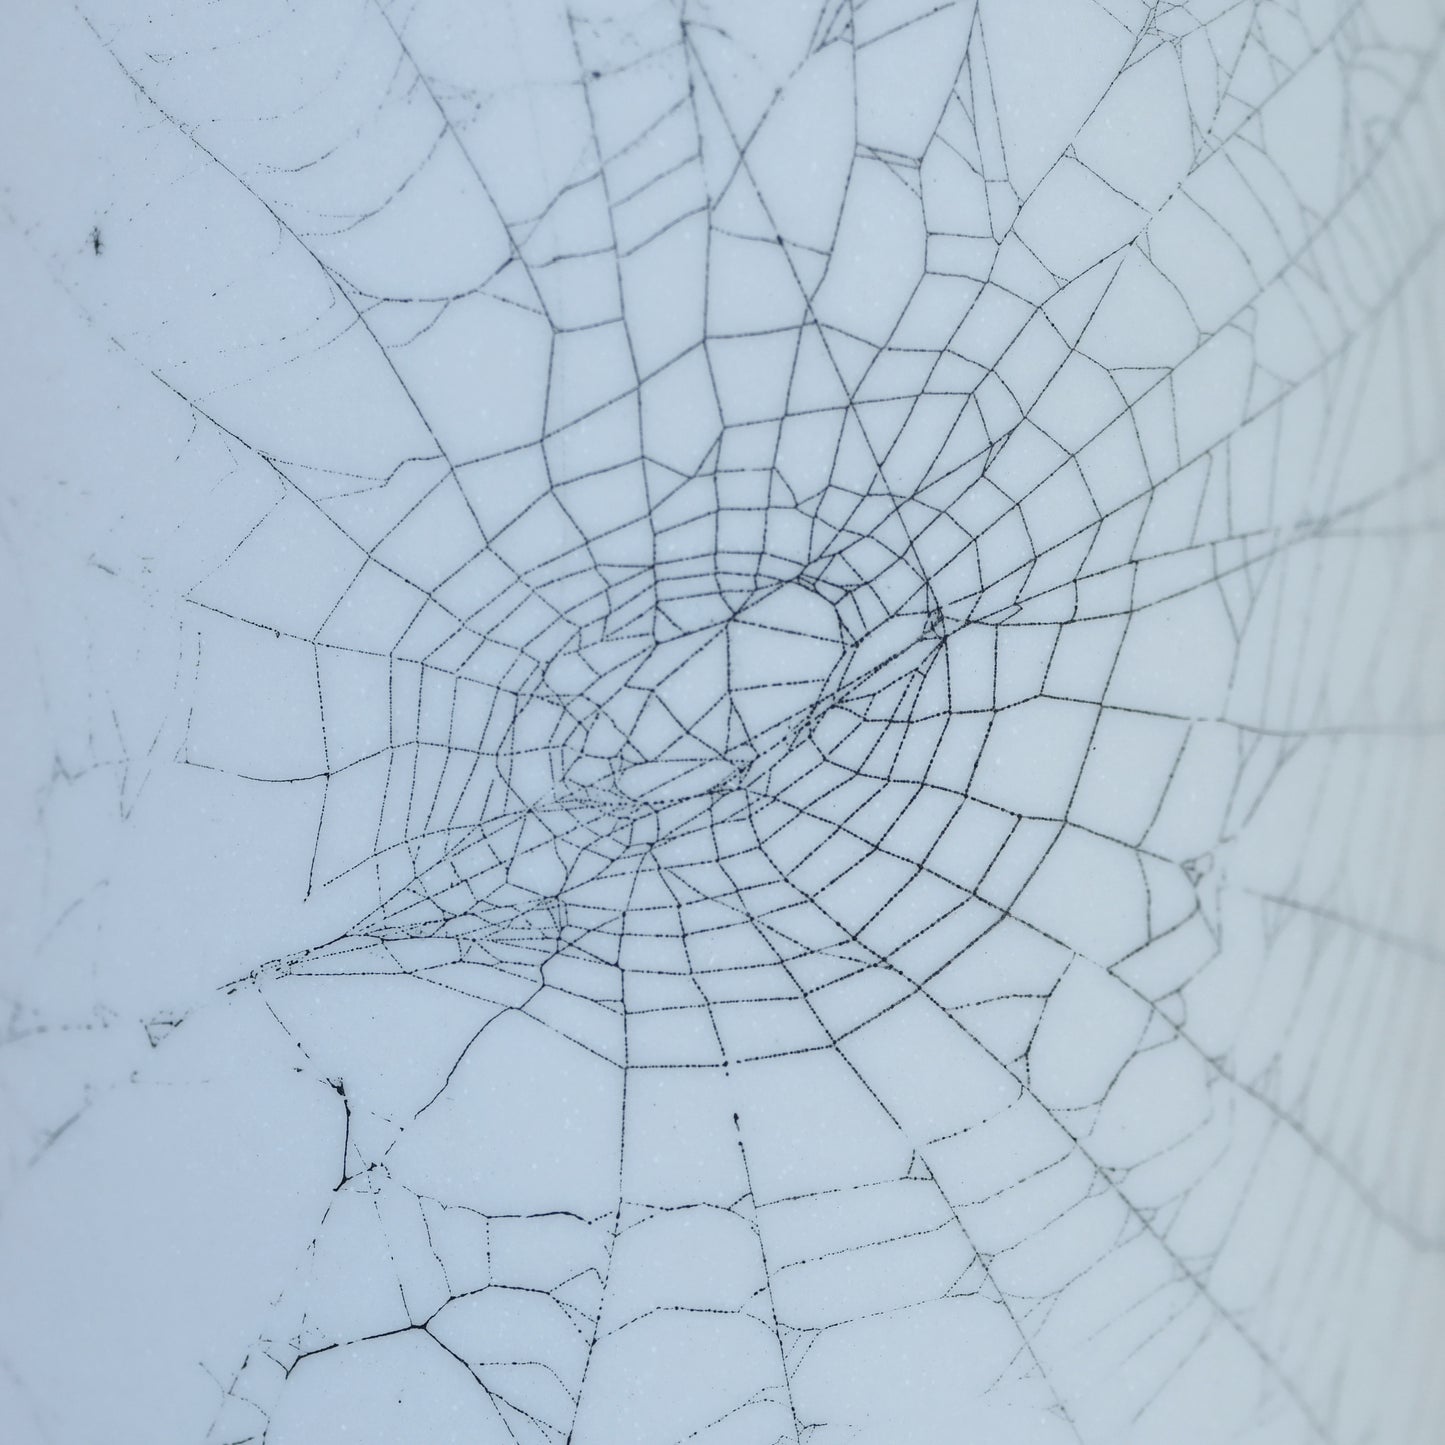 Web on Clay (121), Collected September 09, 2022